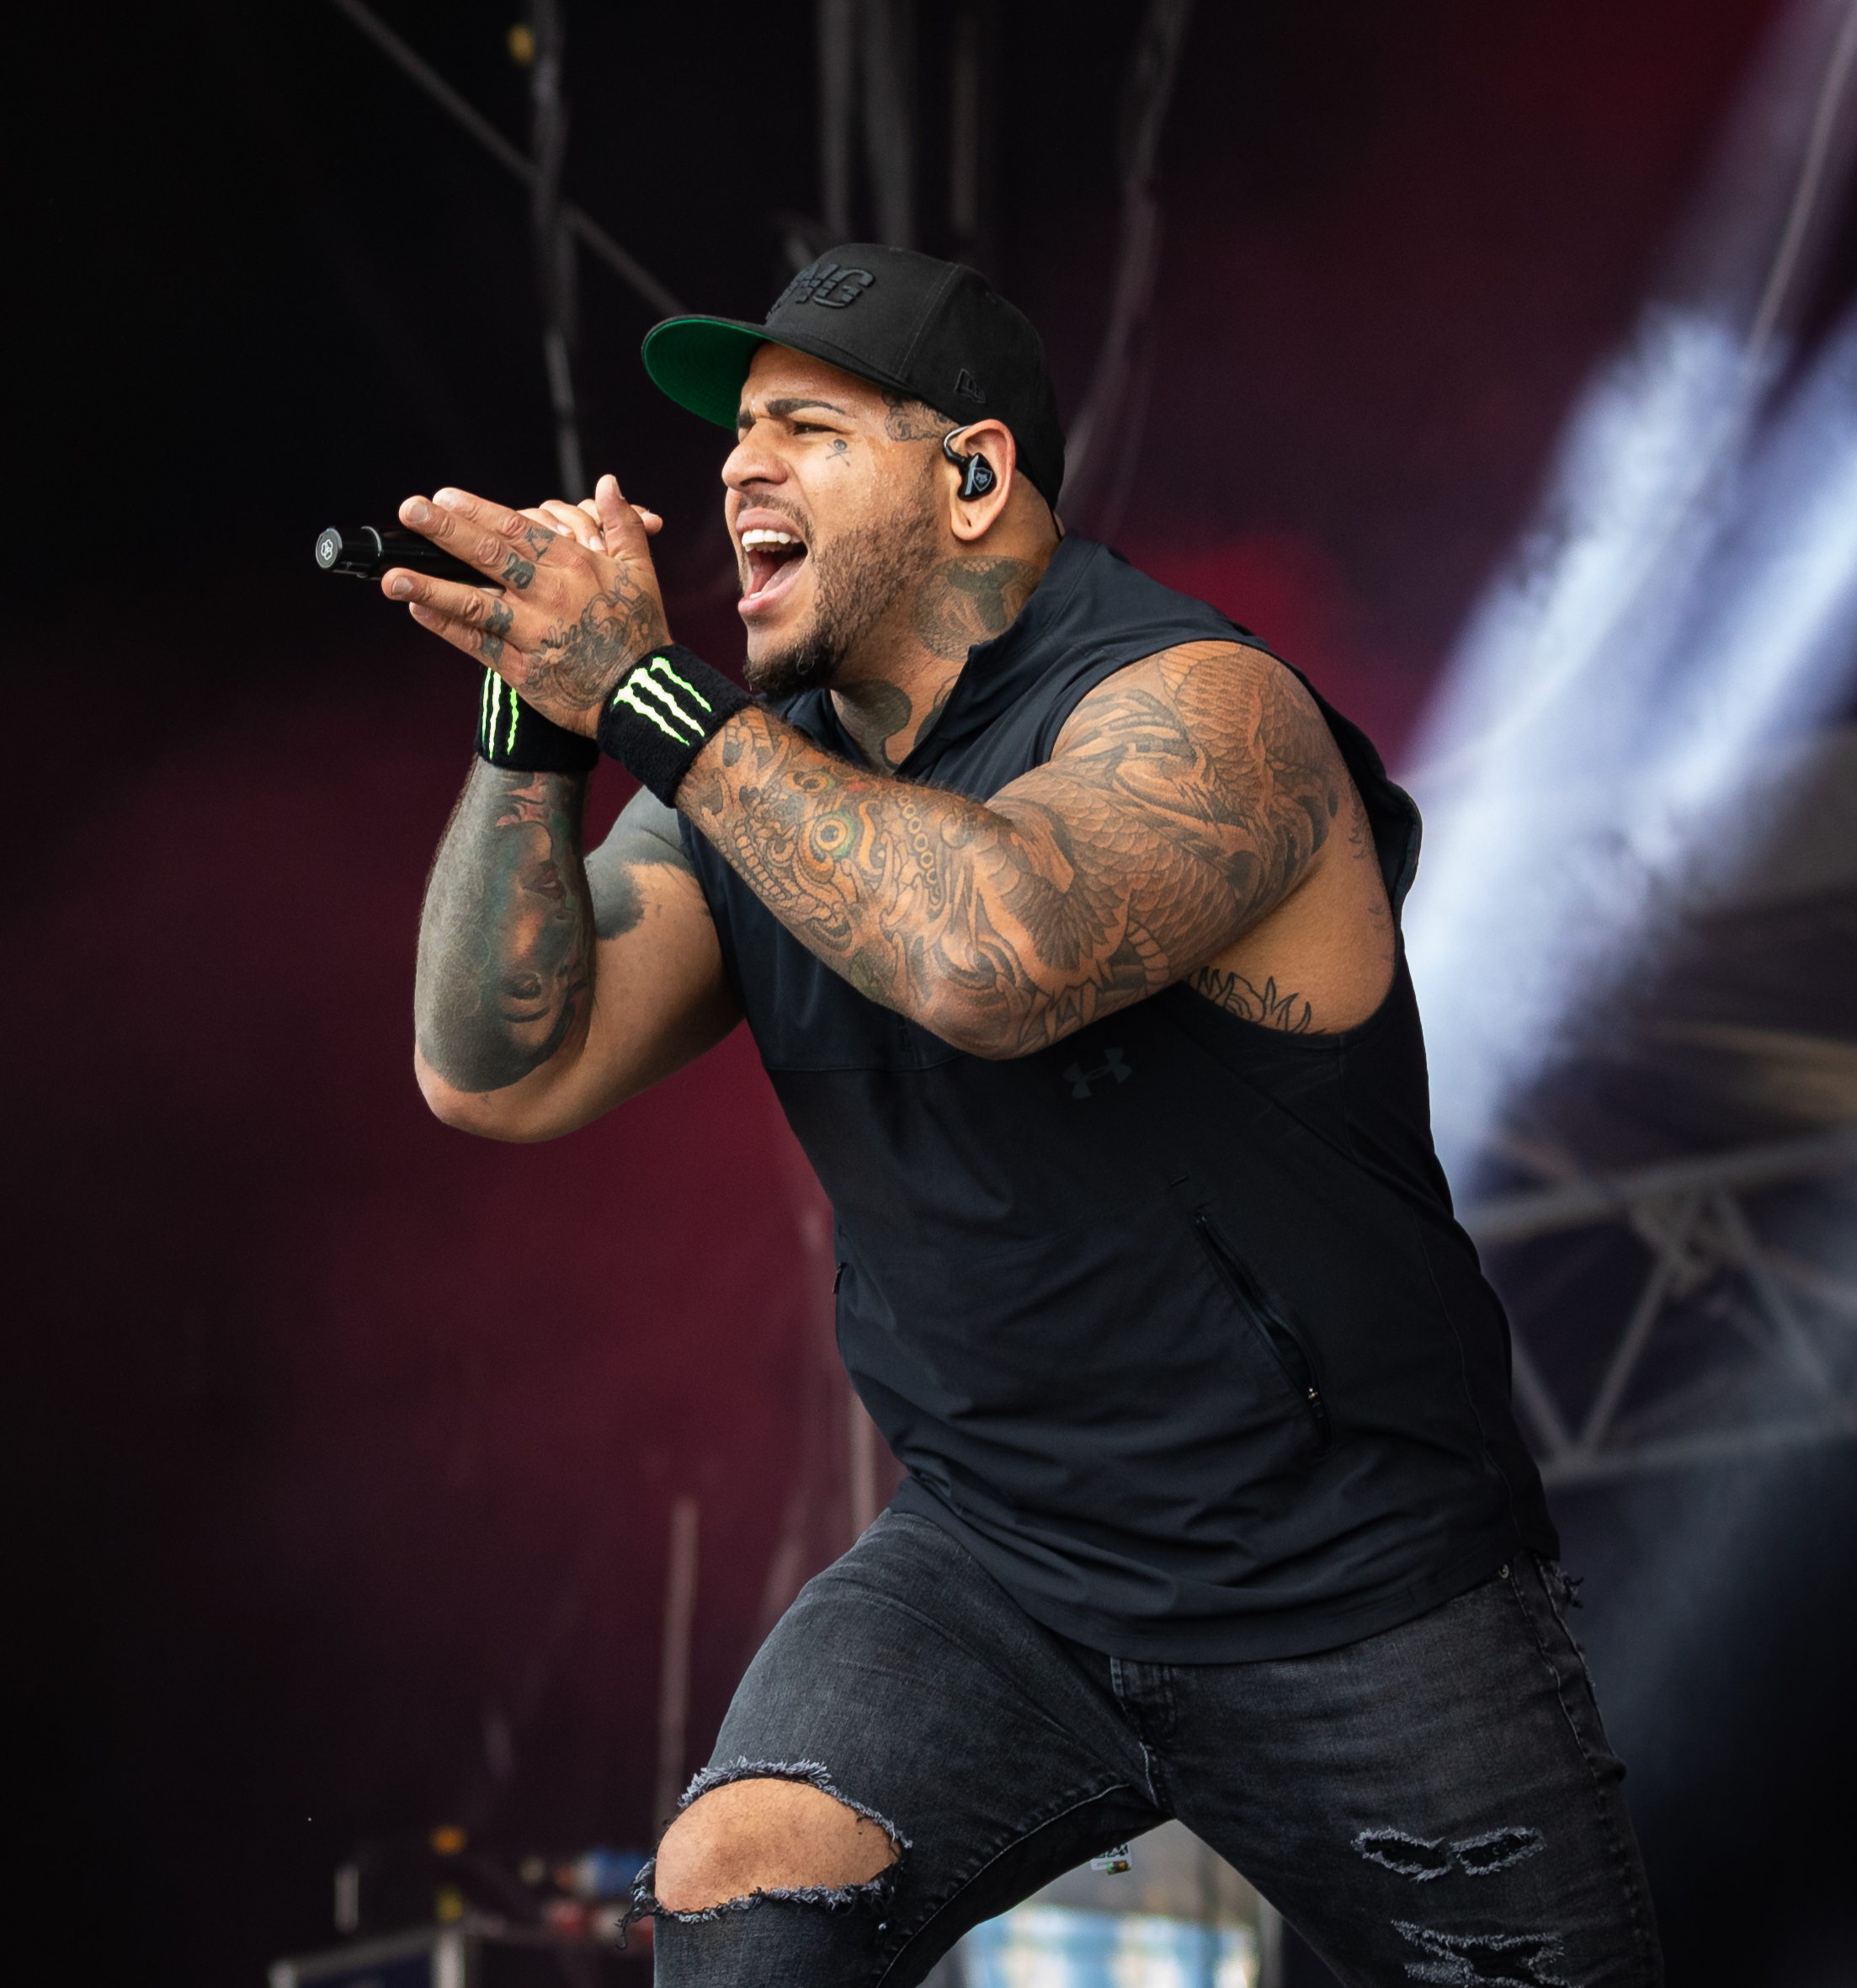 Tommy Vext - Wikipedia